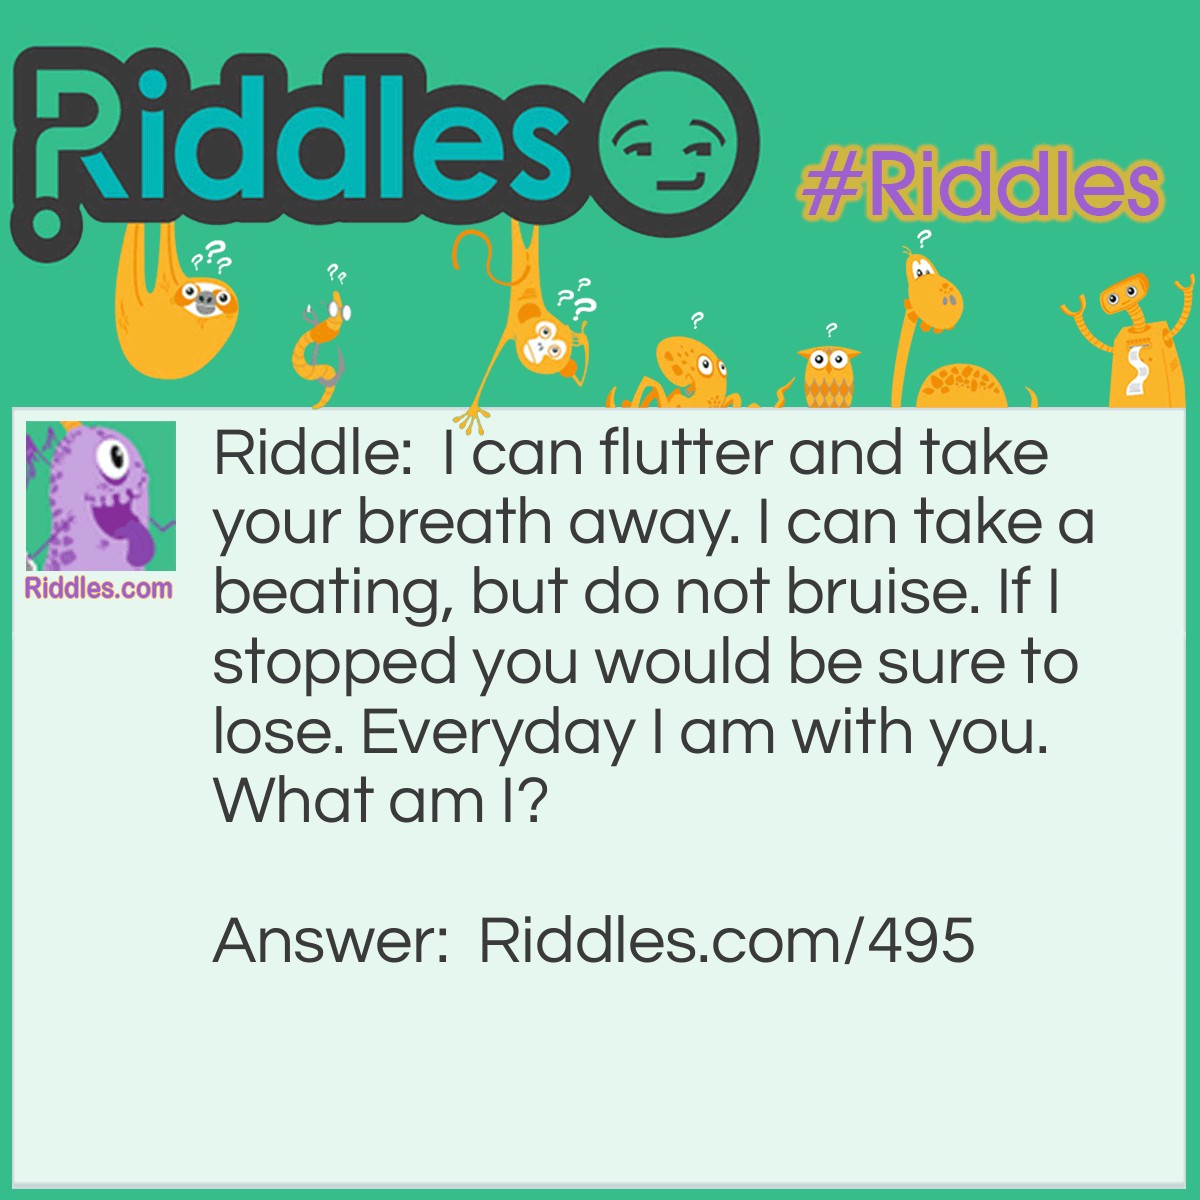 Riddle: I can flutter and take your breath away. I can take a beating, but do not bruise. If I stopped you would be sure to lose. Everyday I am with you.
What am I? Answer: Your heart.